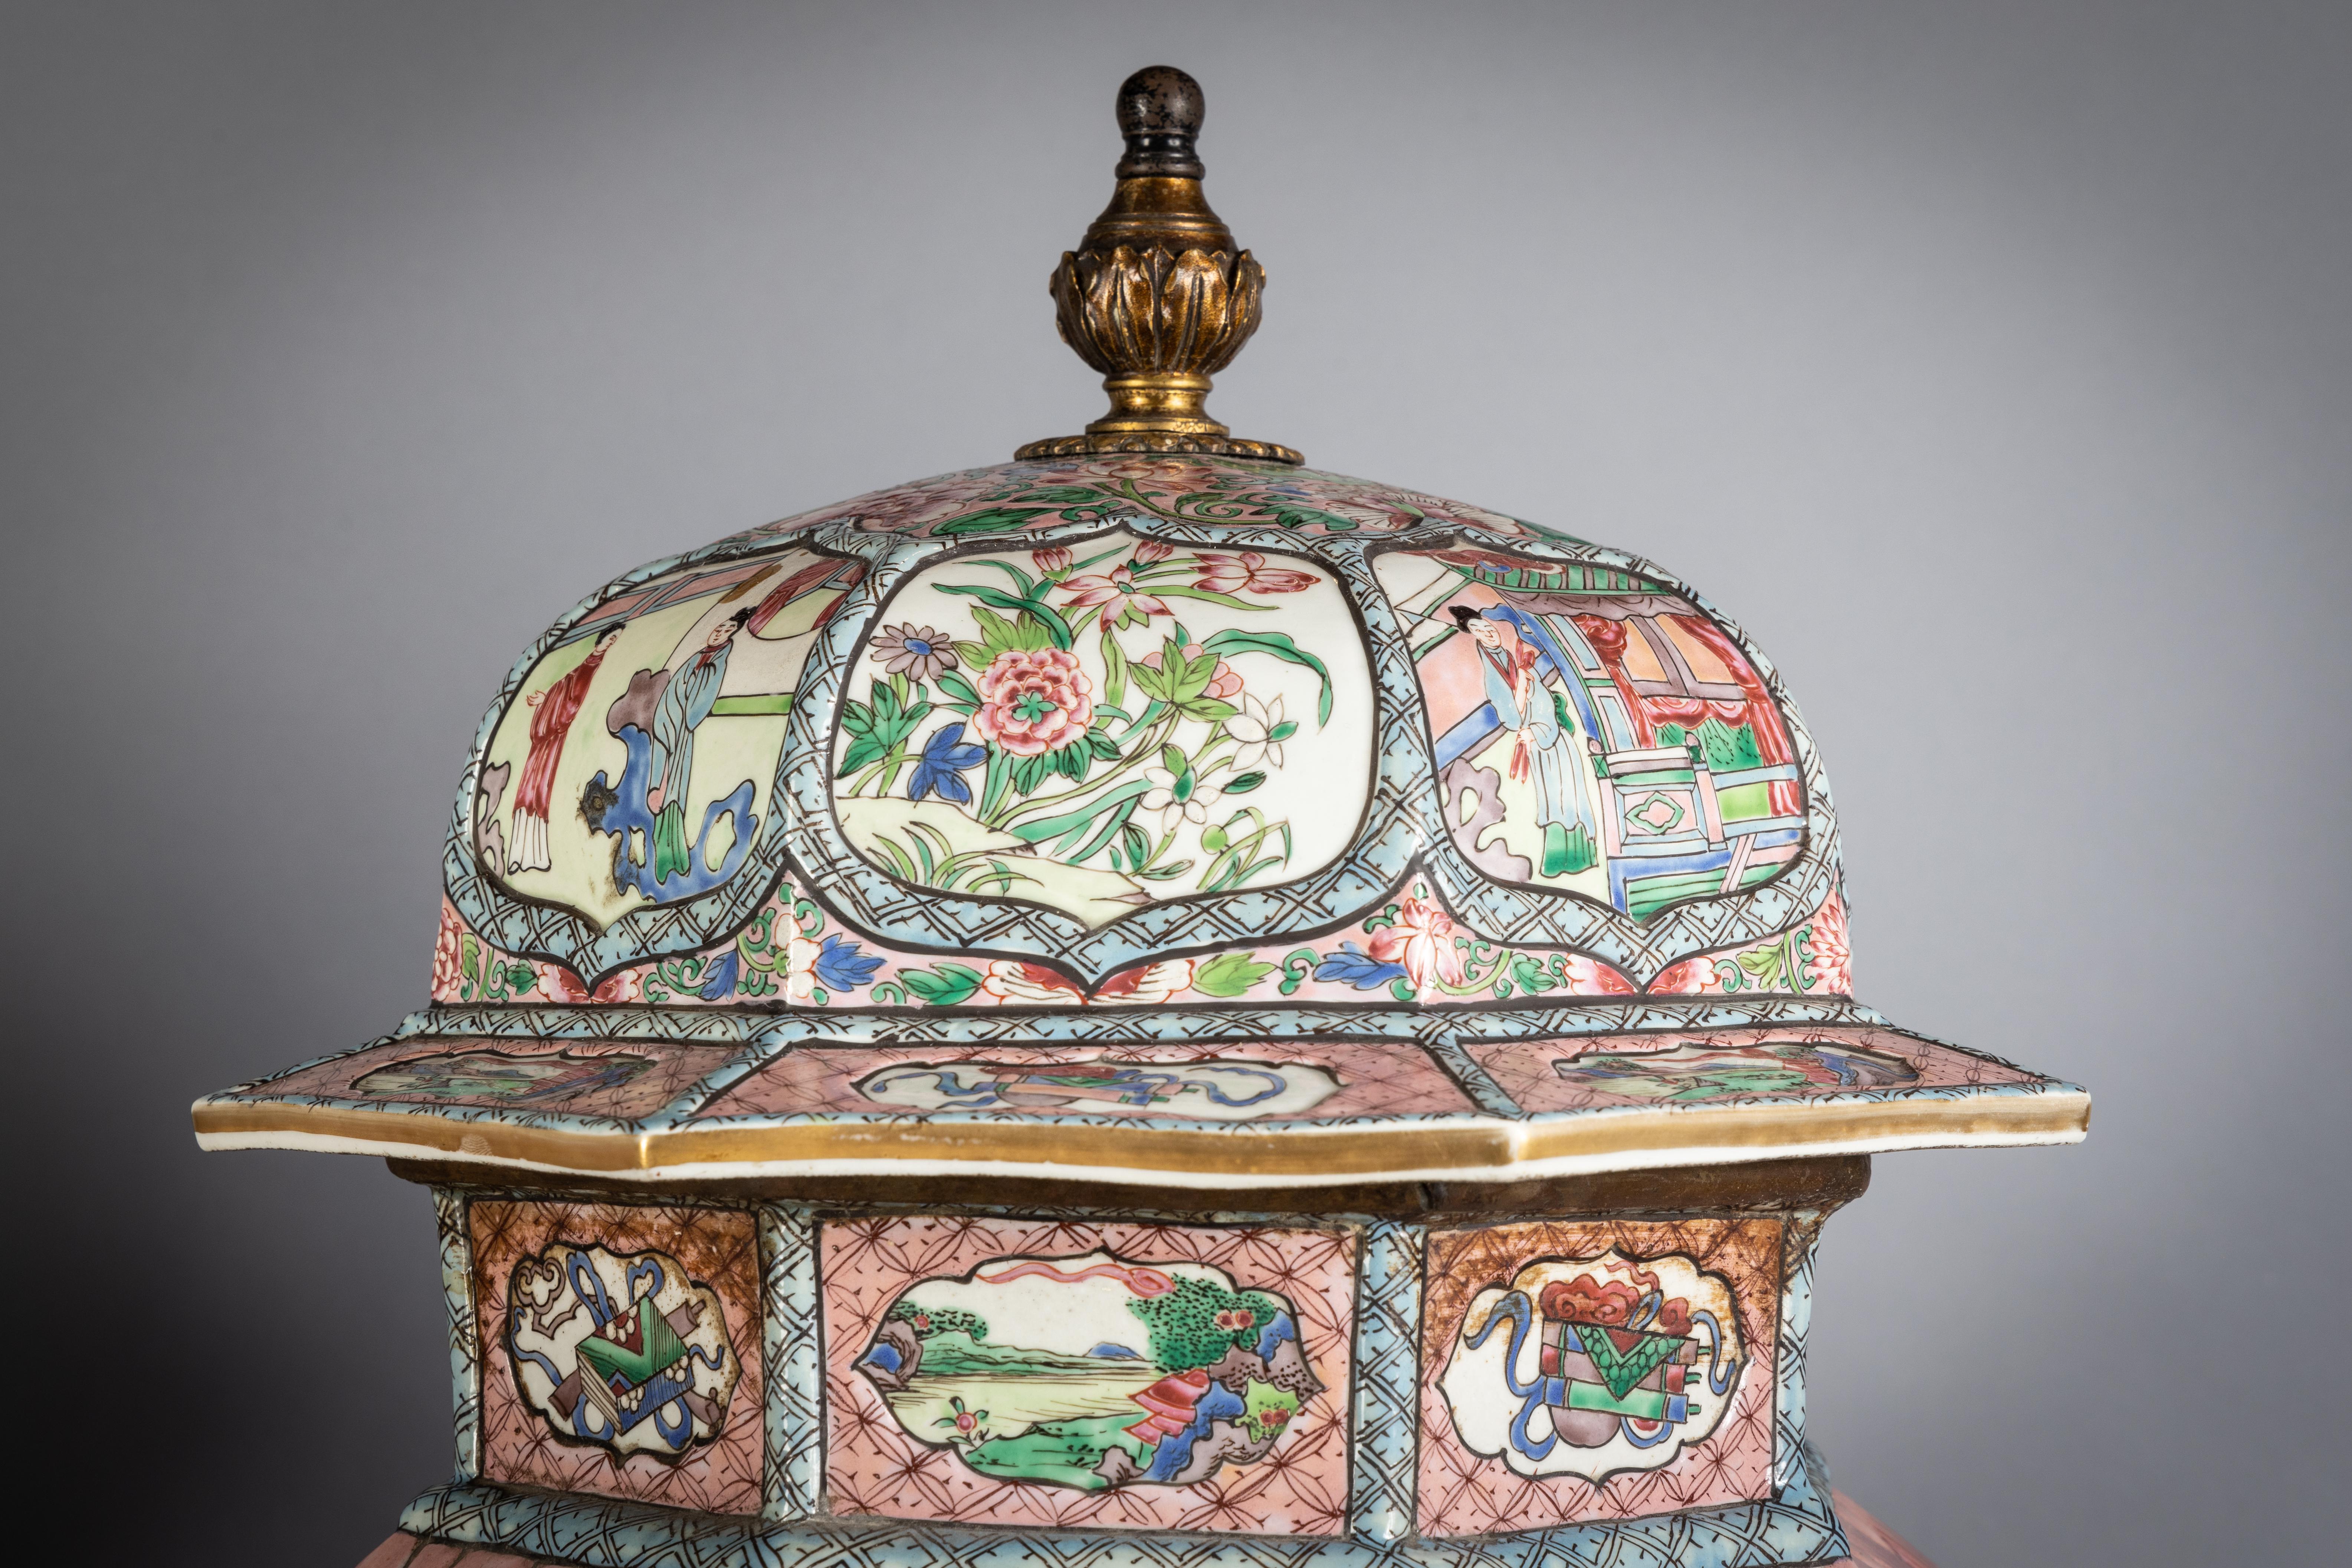 Finely enameled in a Famille Rose palette, the octagonal panels alternating with floral and figural decoration, the attached covers with a bronze finial, mounted on a wood base, circa 1875.